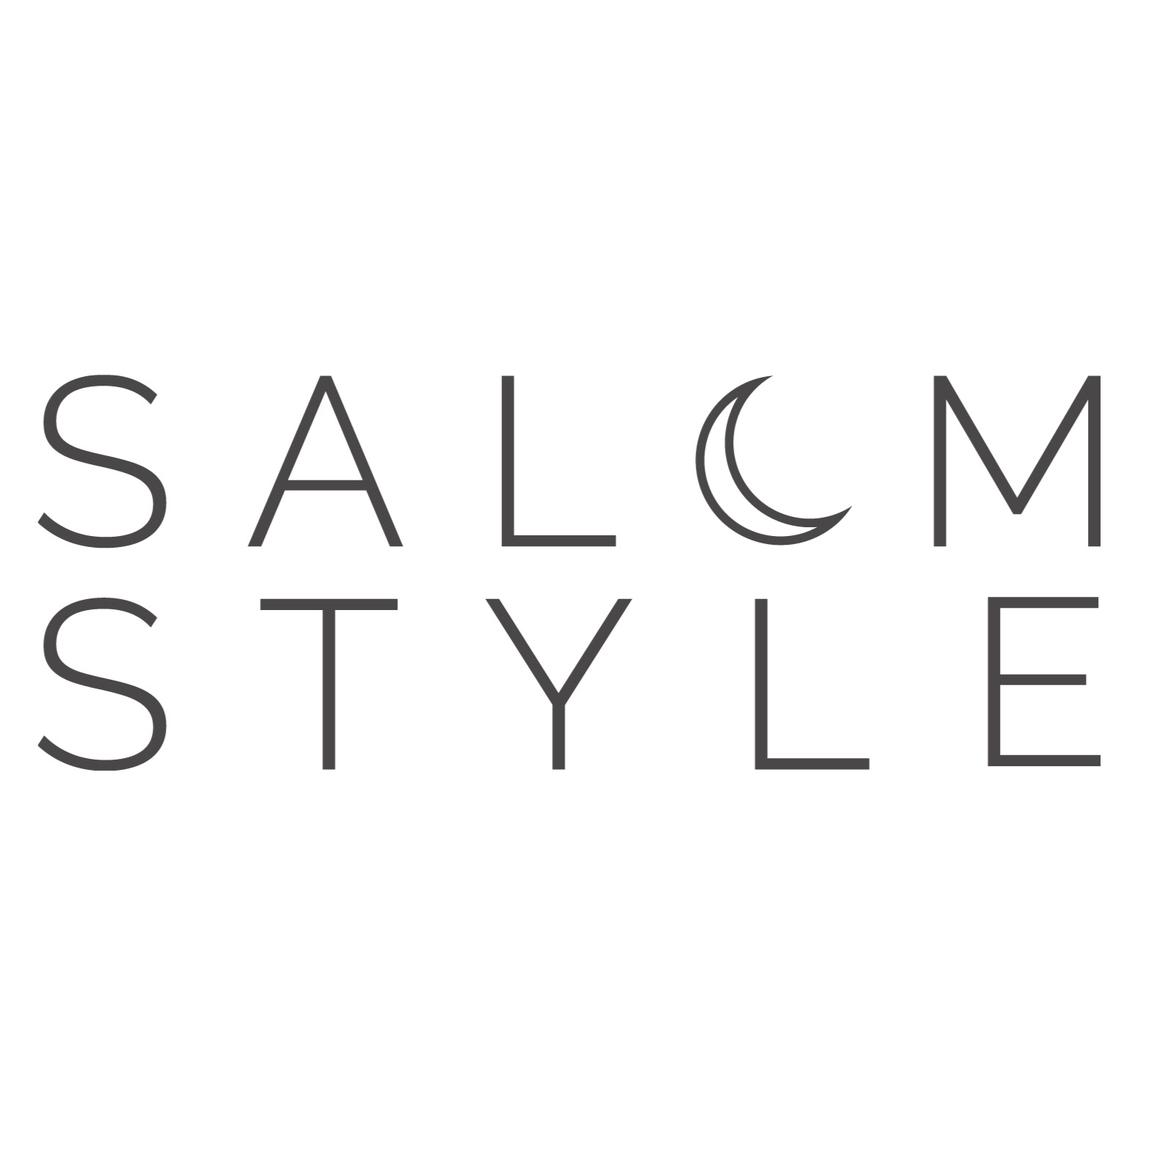 SalemStyle's images